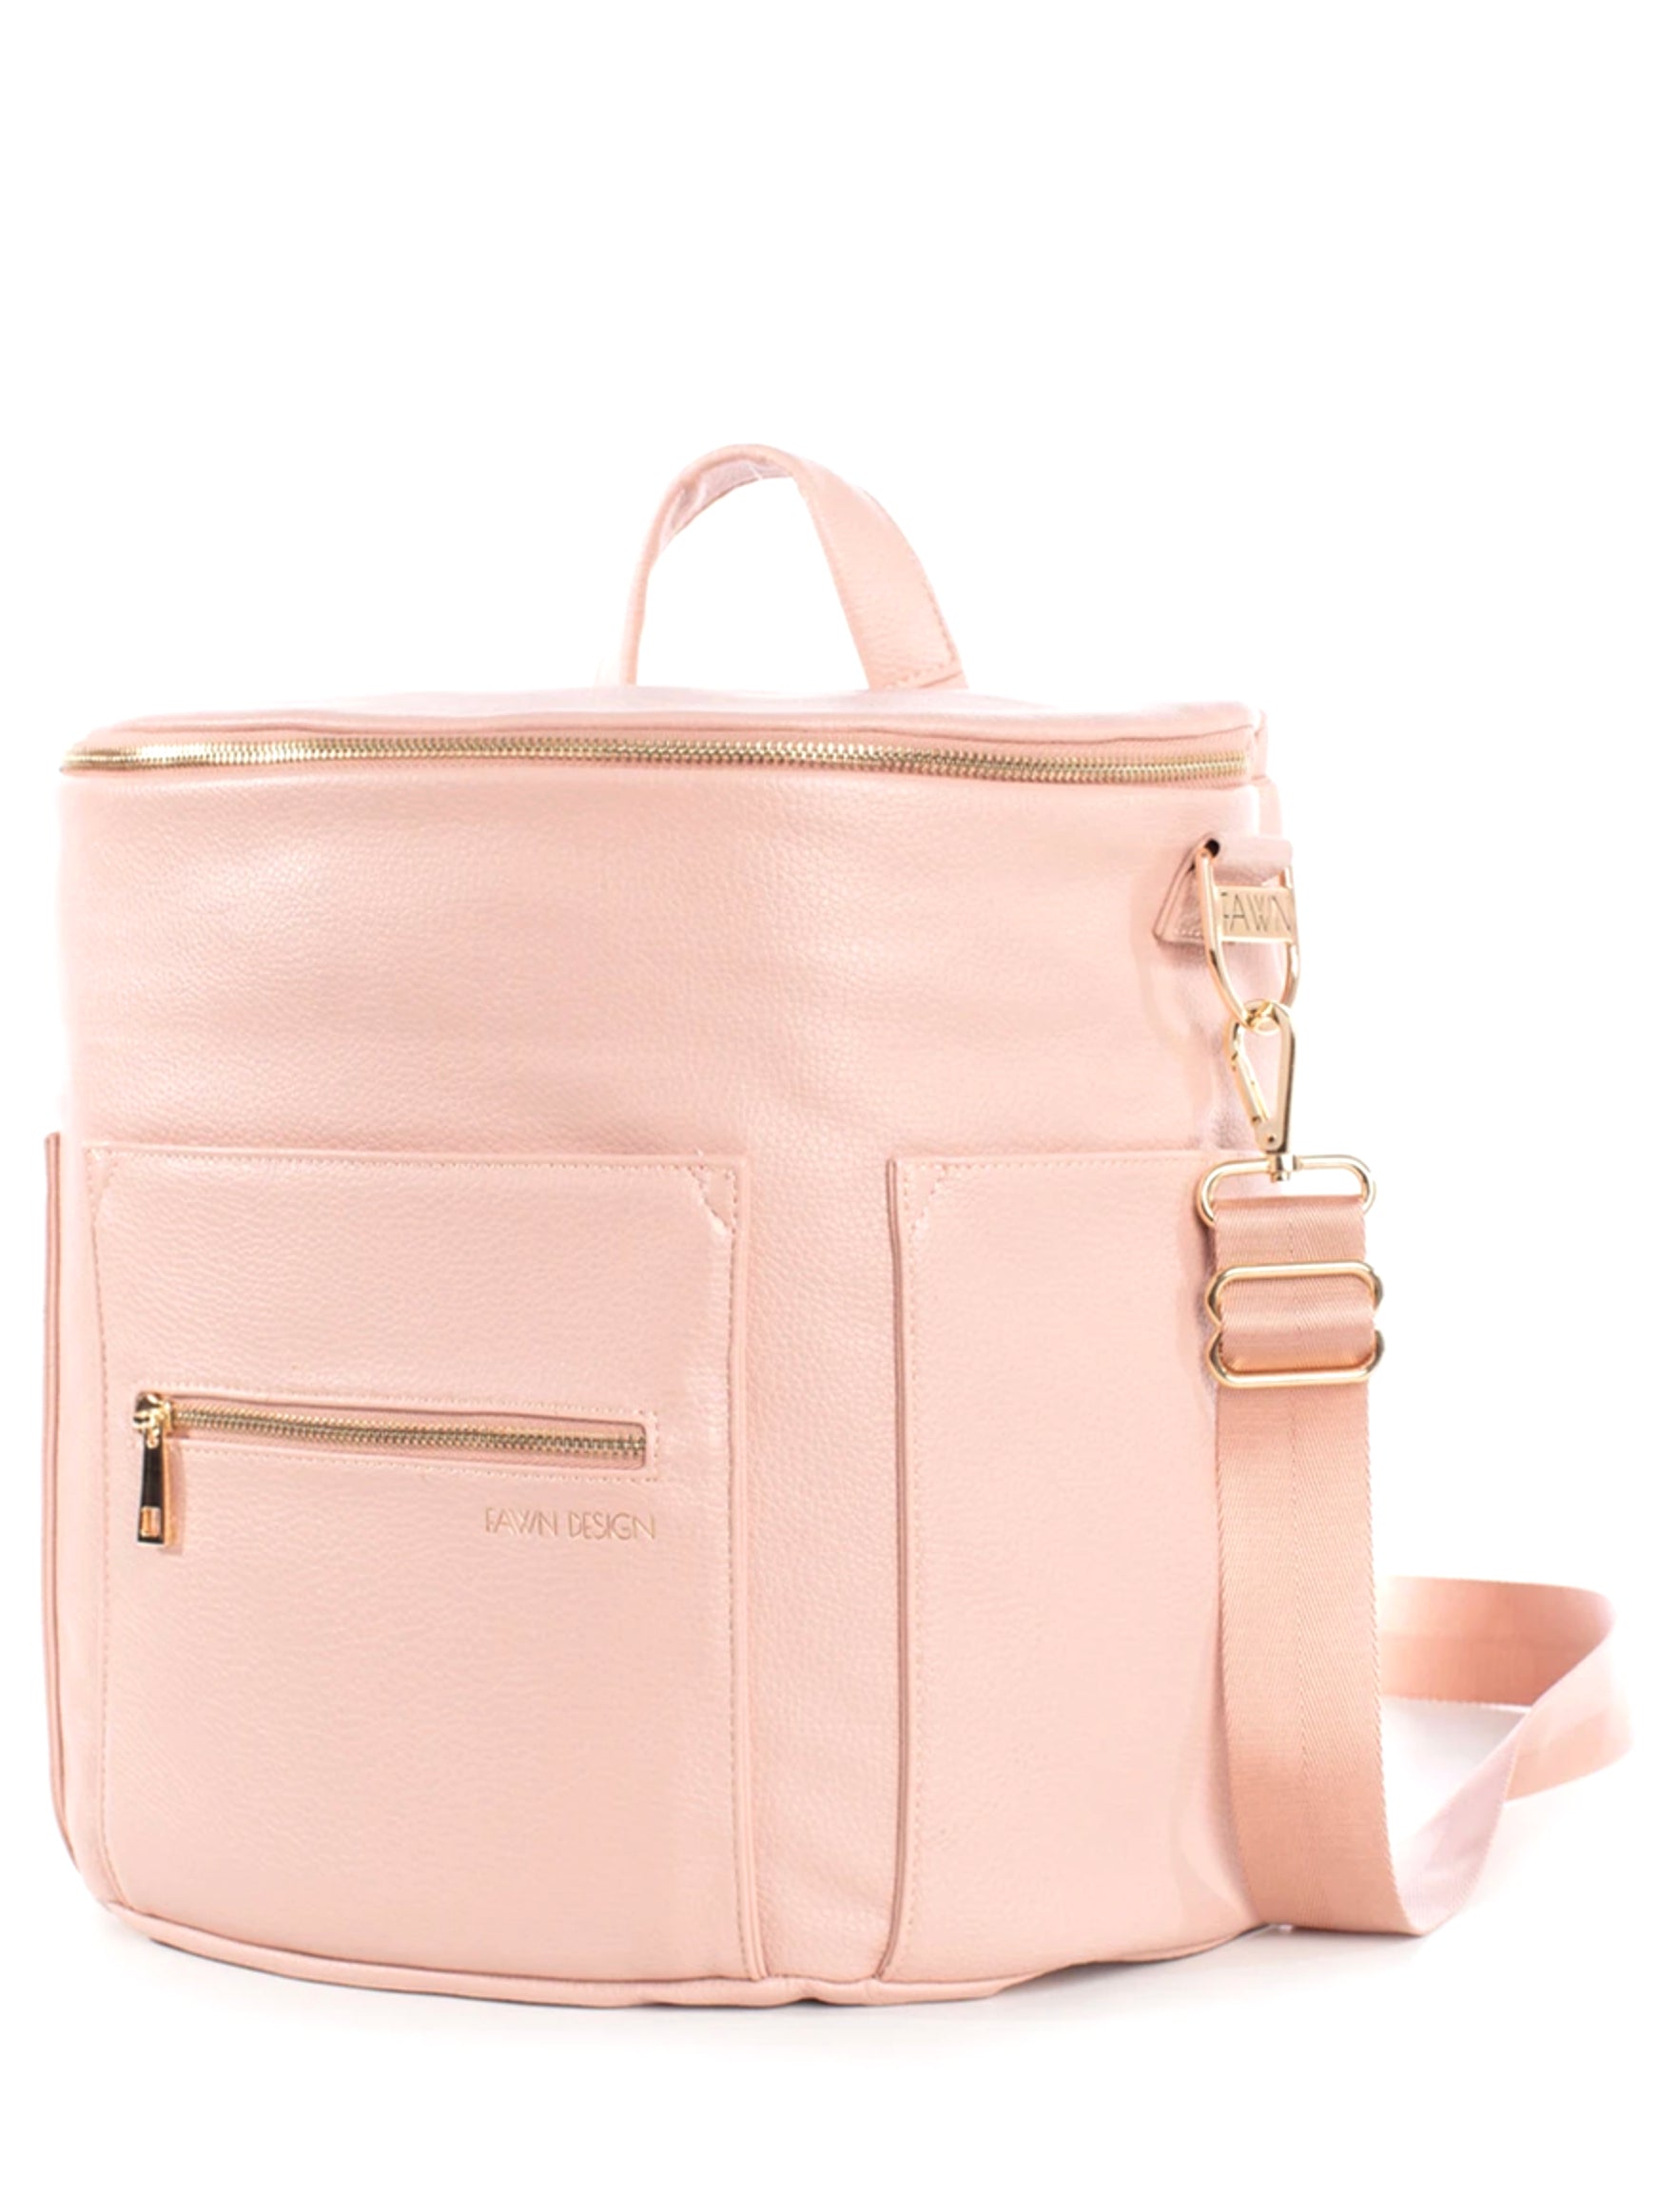 New Pink Fawn Design Diaper Bag, Baby